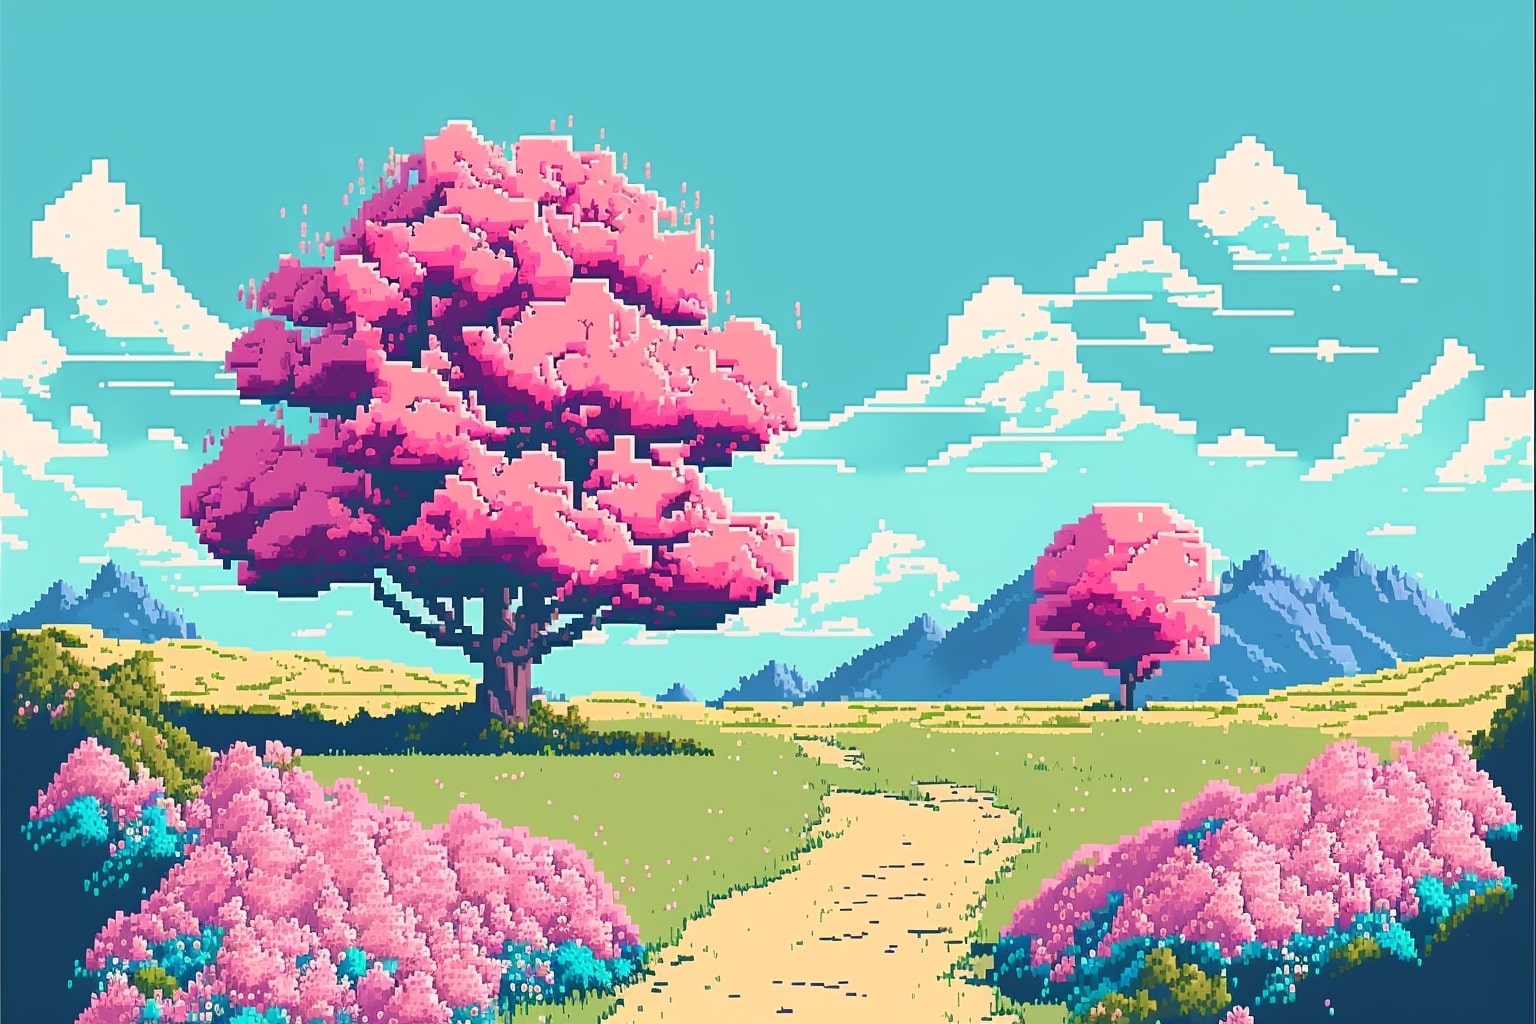 Pixel art picture of a pink tree in the middle of a field.